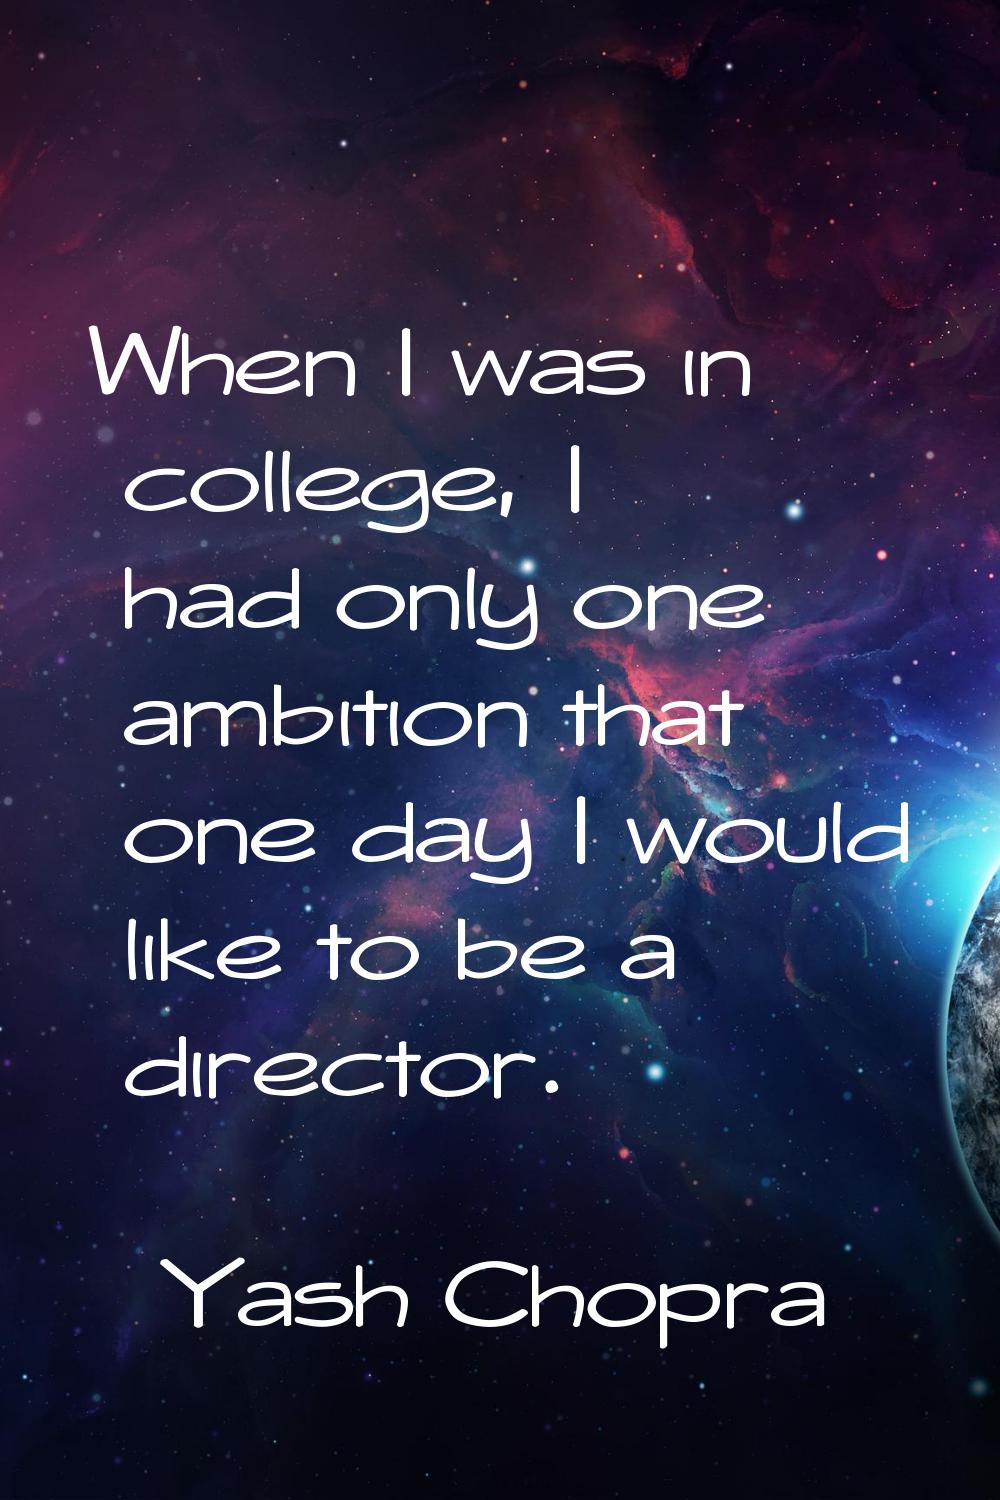 When I was in college, I had only one ambition that one day I would like to be a director.